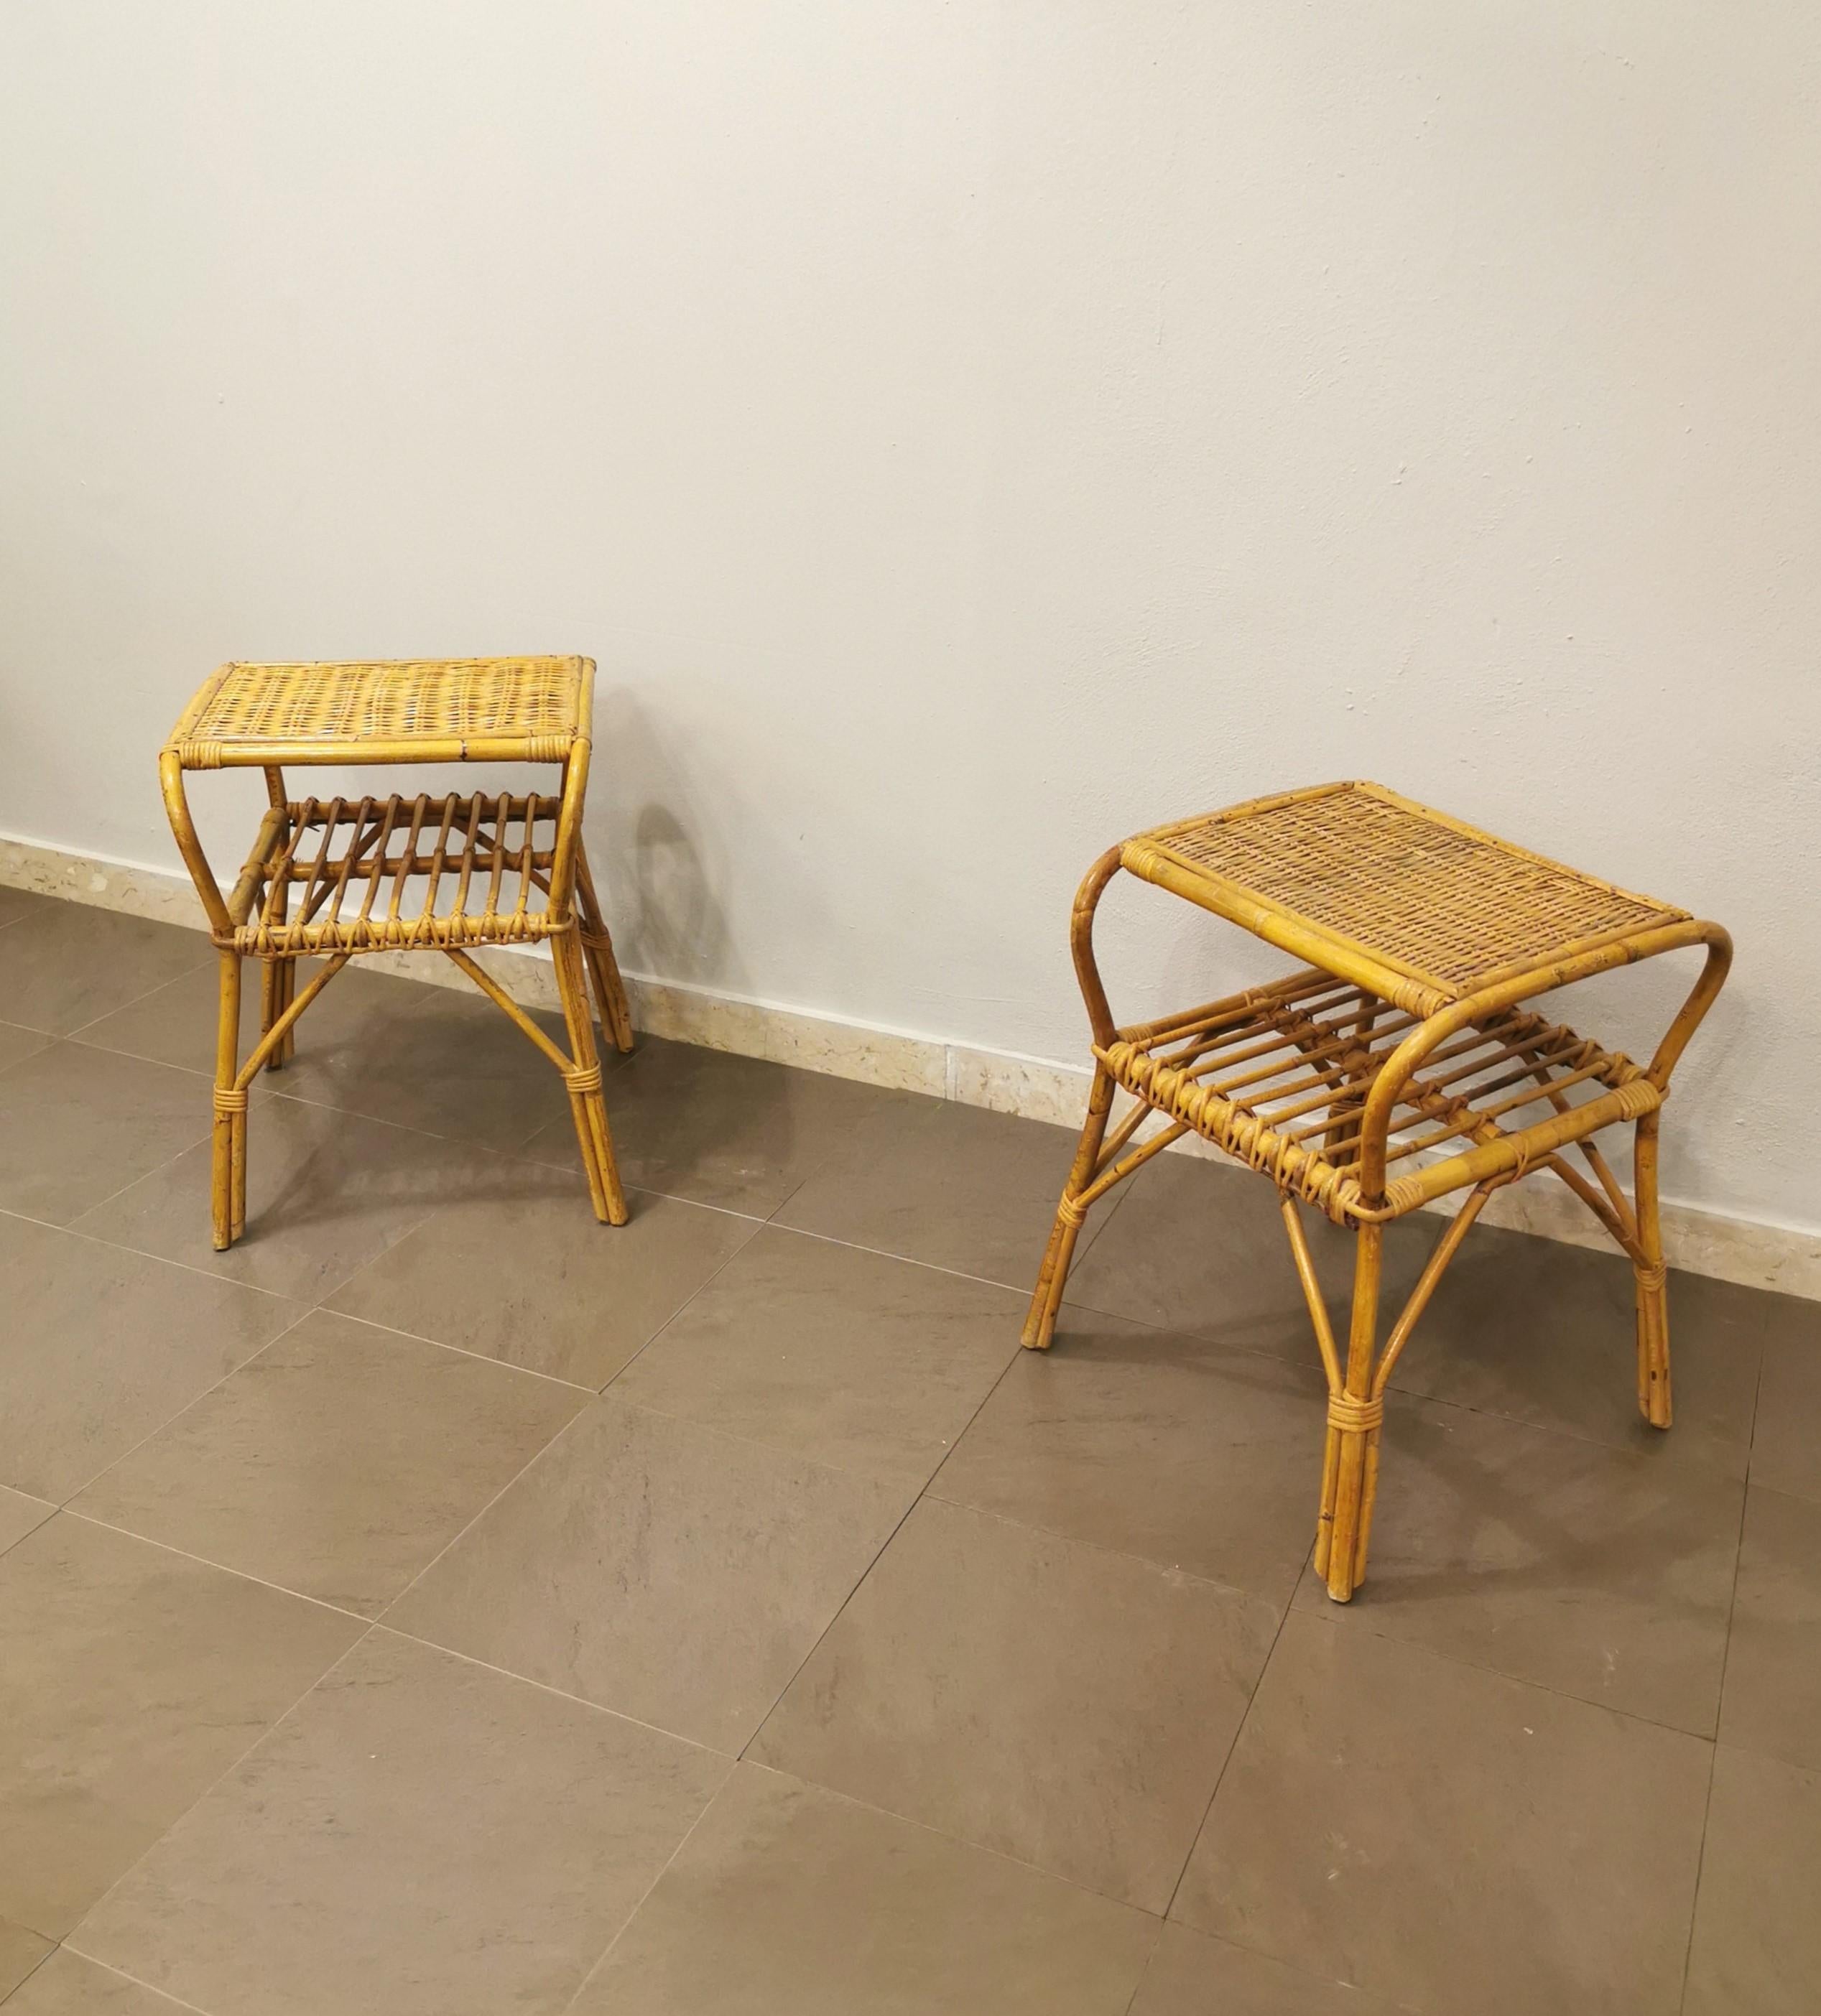 Particular set of 2 bedside tables designed by an unknown designer and produced in Italy in the 1960s. Each single bedside table is in bamboo and rattan with 2 shelves and 4 feet.